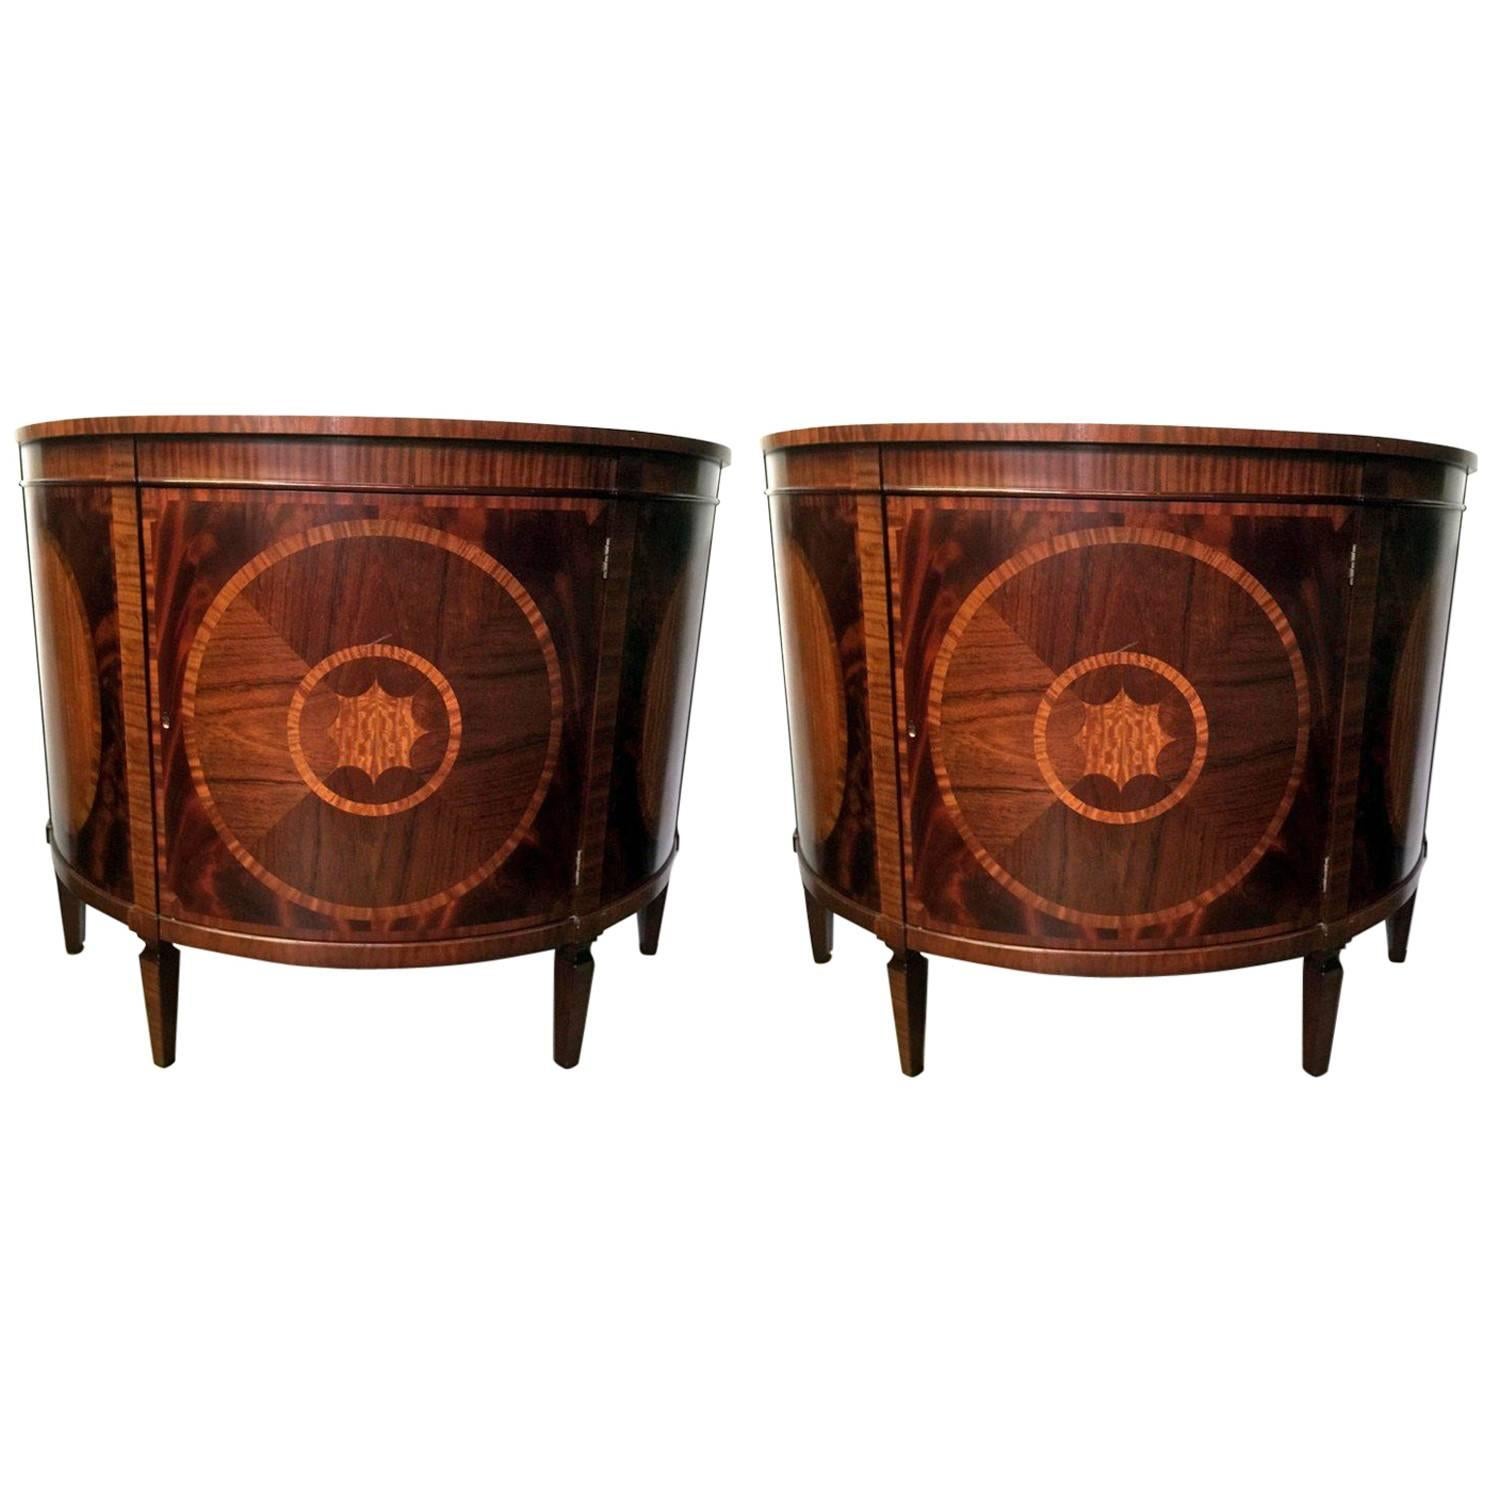 Pair of Mahogany and Satinwood Baker Demilune Commodes